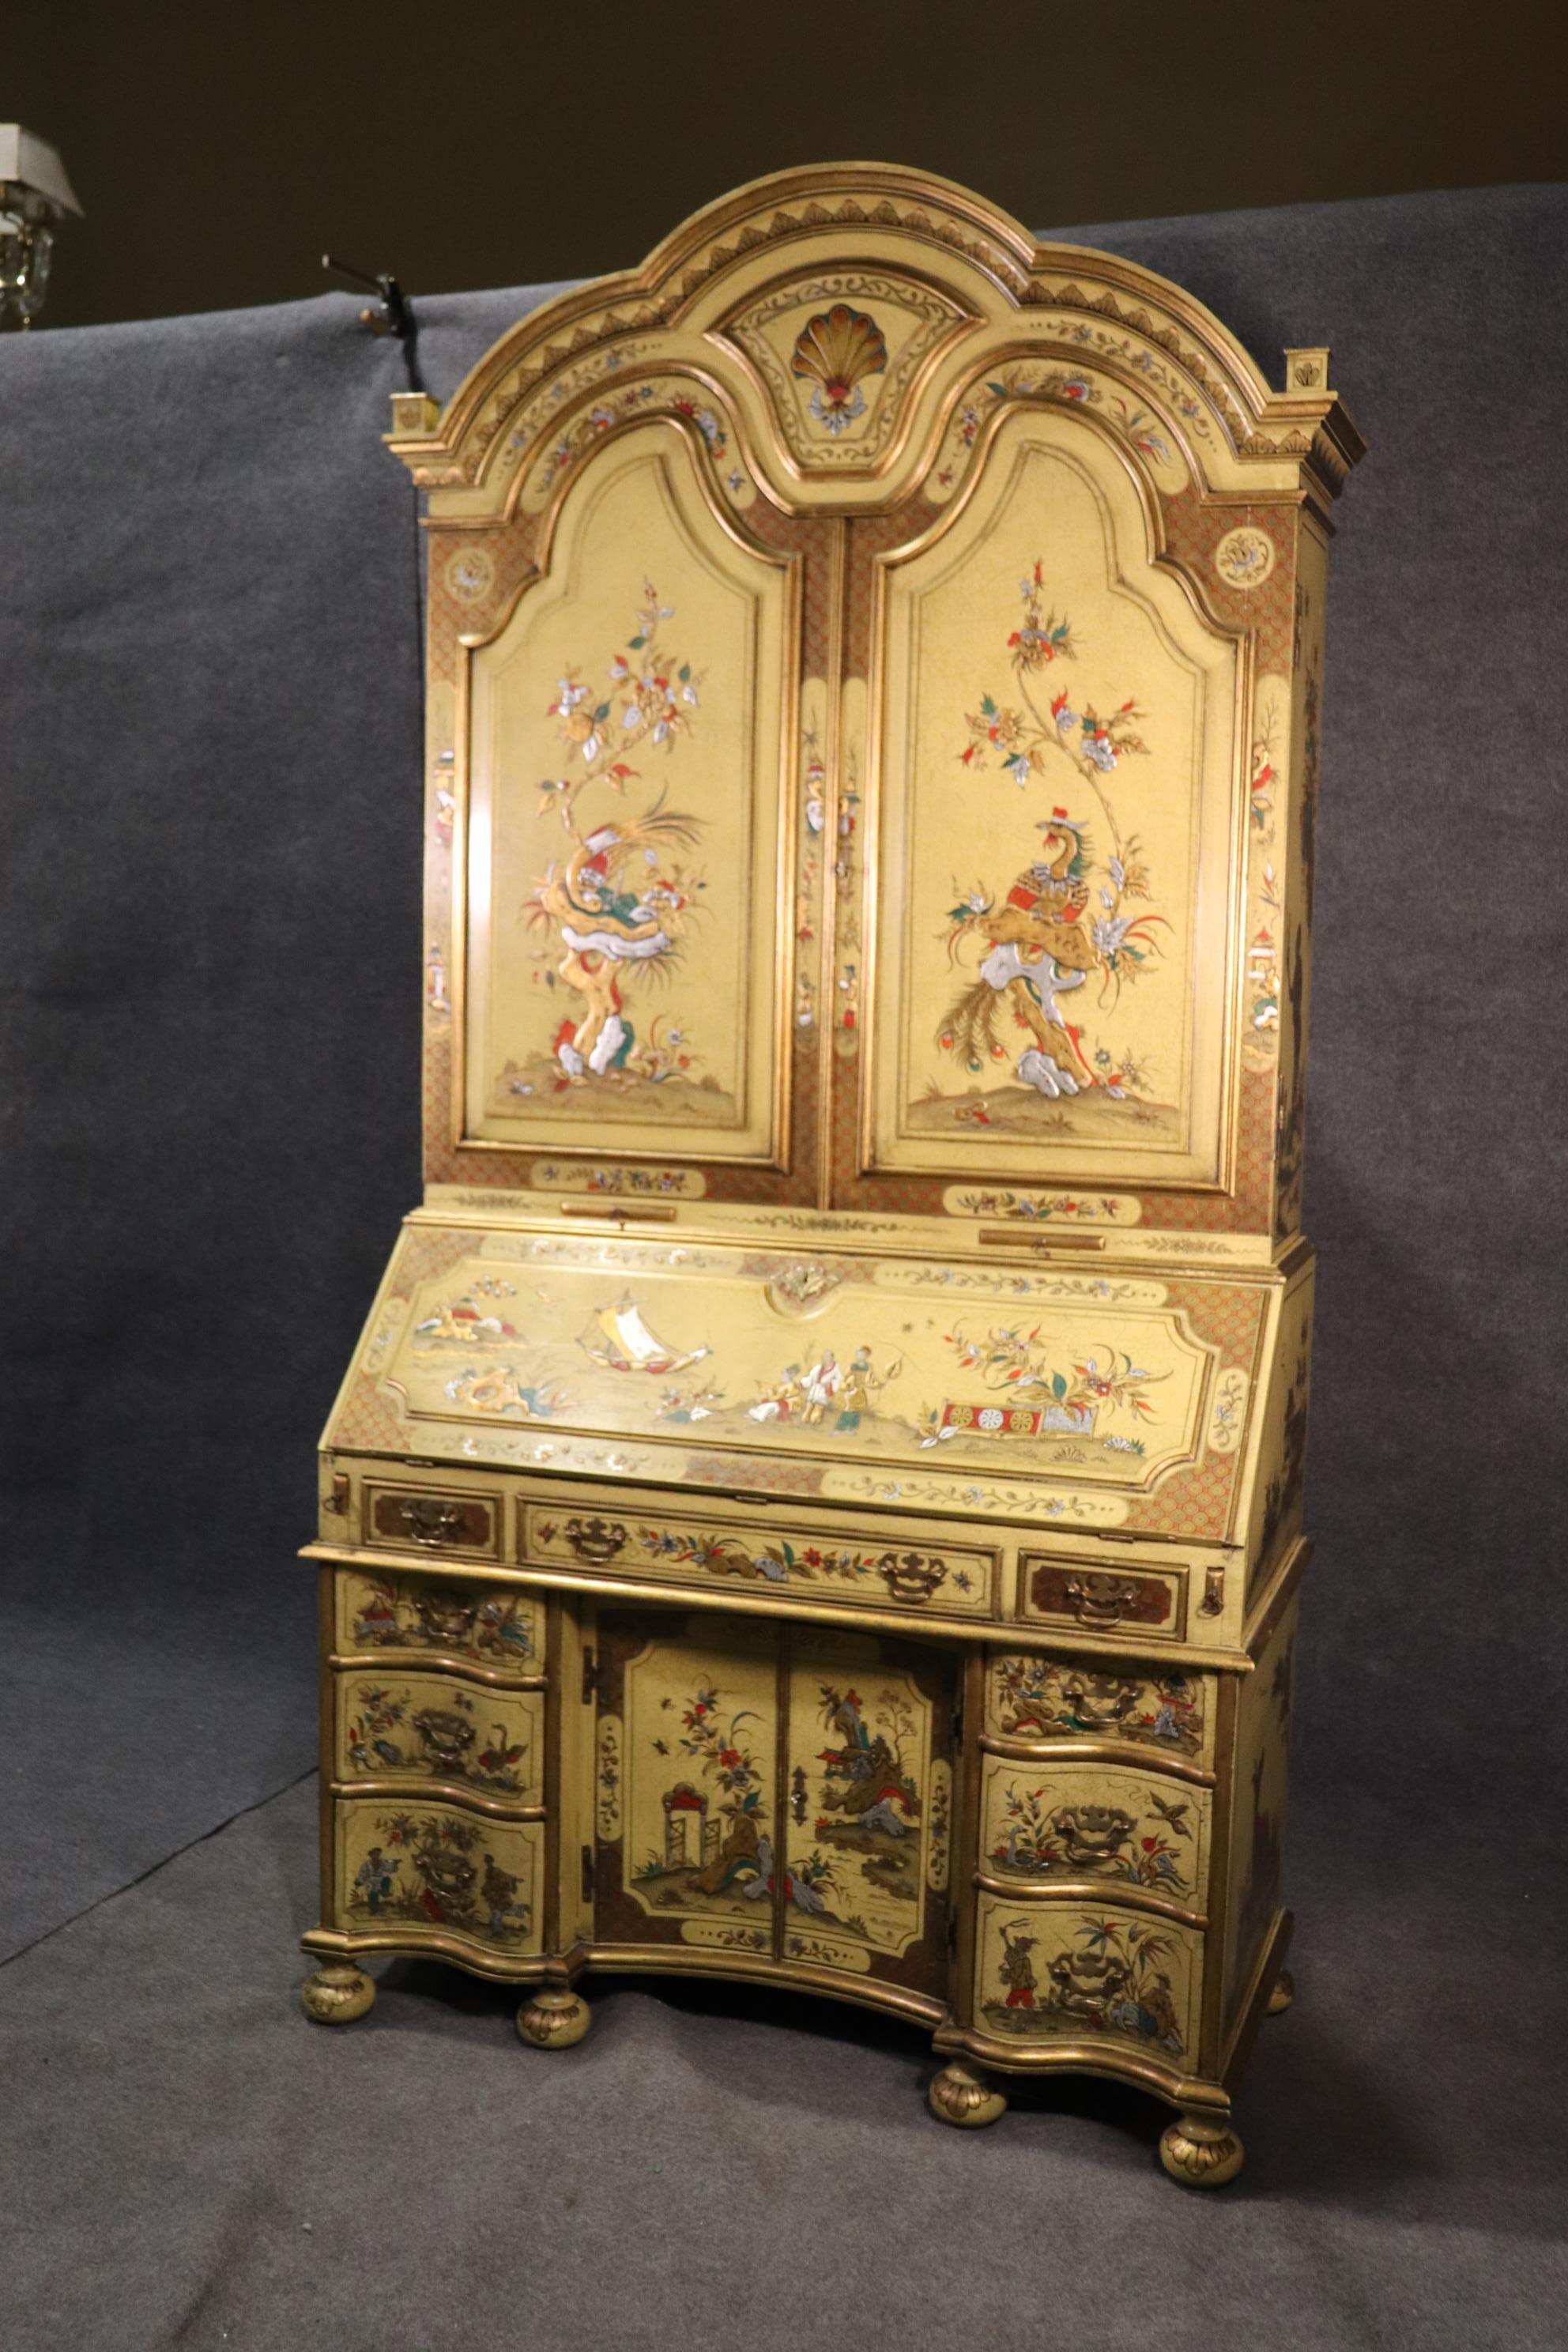 This is a handmade secretary desk that is one of the most beautiful we have ever had, in terms of color, and in terms of the fantastic design of the case. The desk features figures and scenes of China that are beautifully hand painted and decorated.